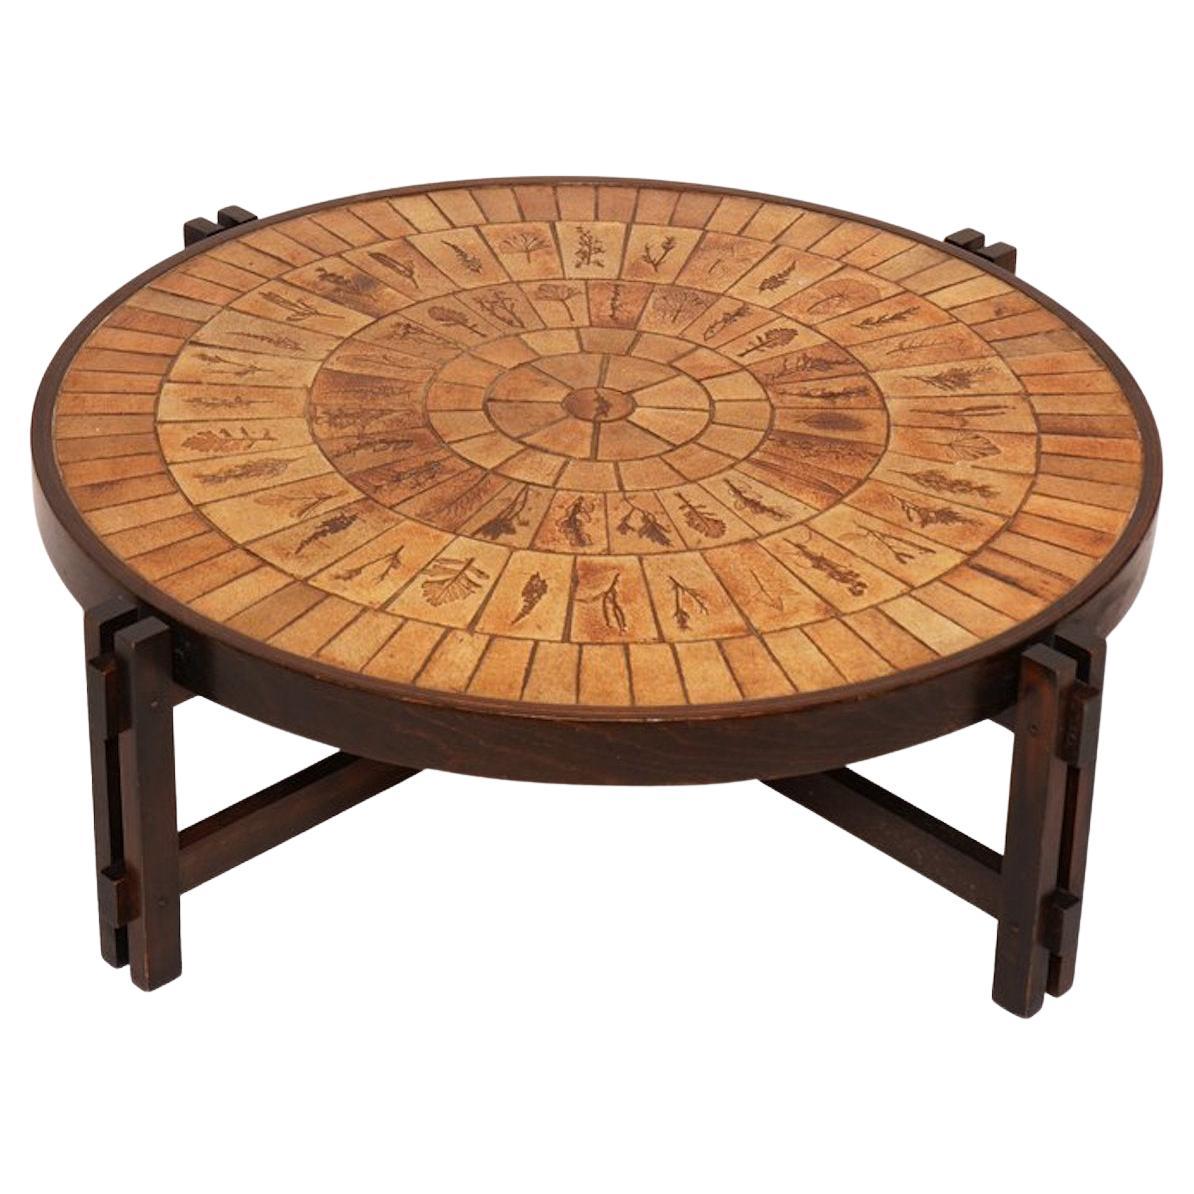 Roger Capron Tiled Round Coffee Table